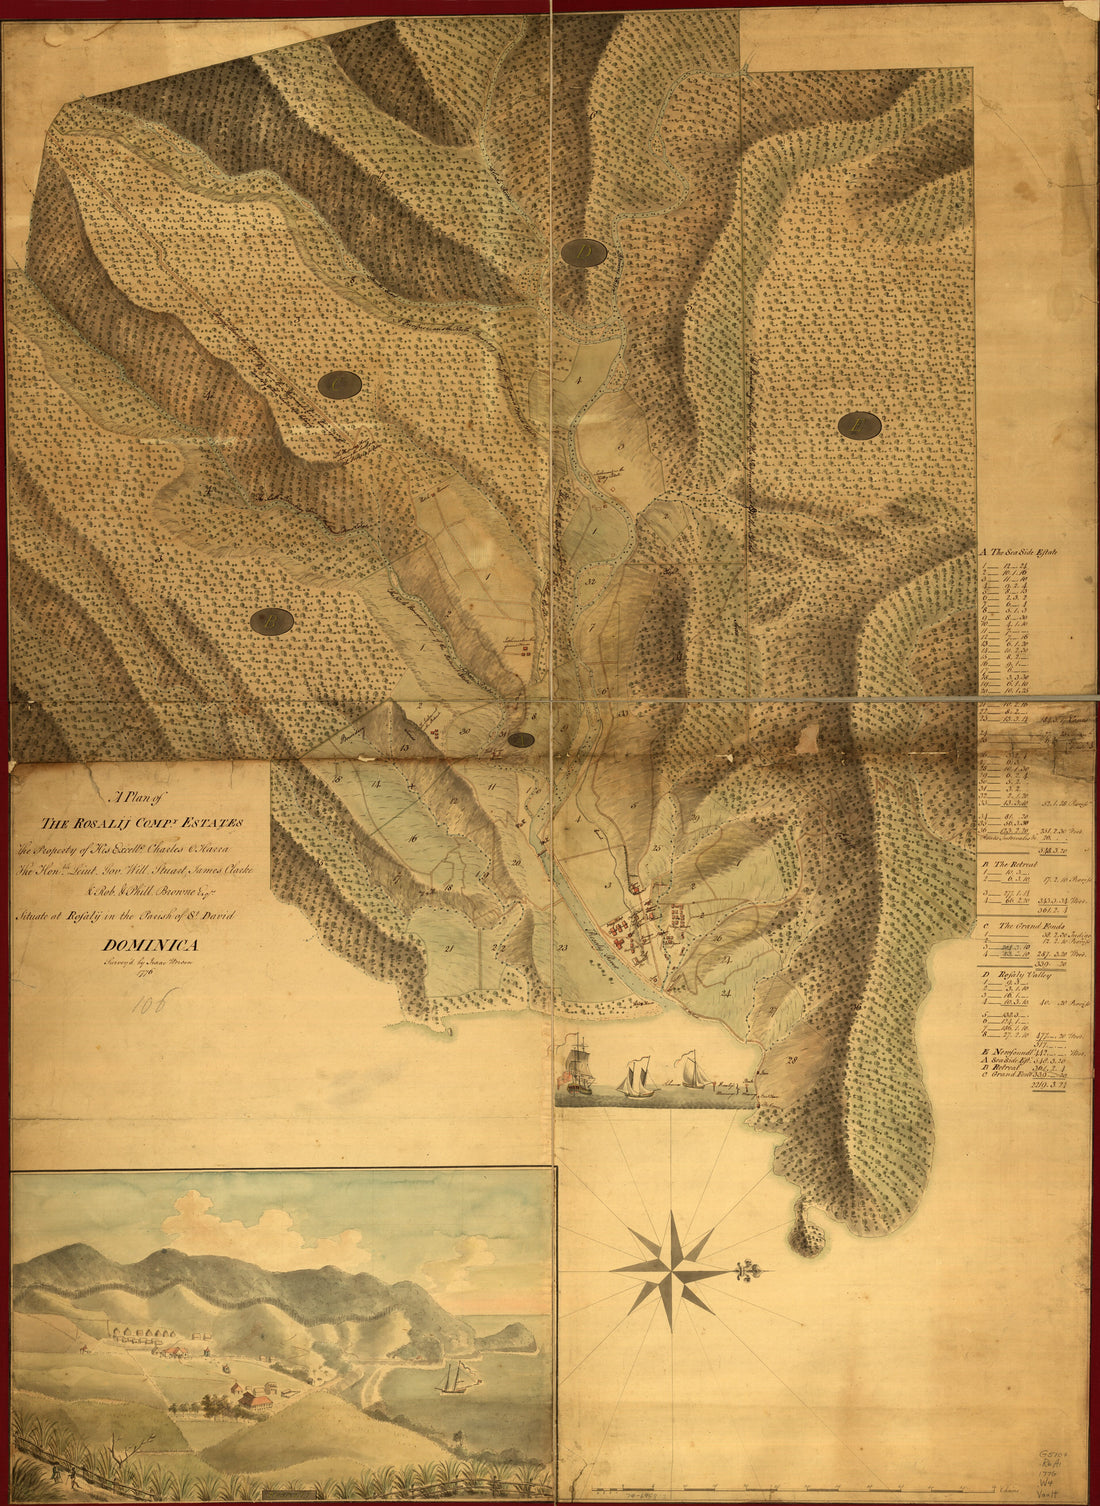 This old map of A Plan of the Rosalij Compy. Estates, the Property of His Excelly. Charles O&